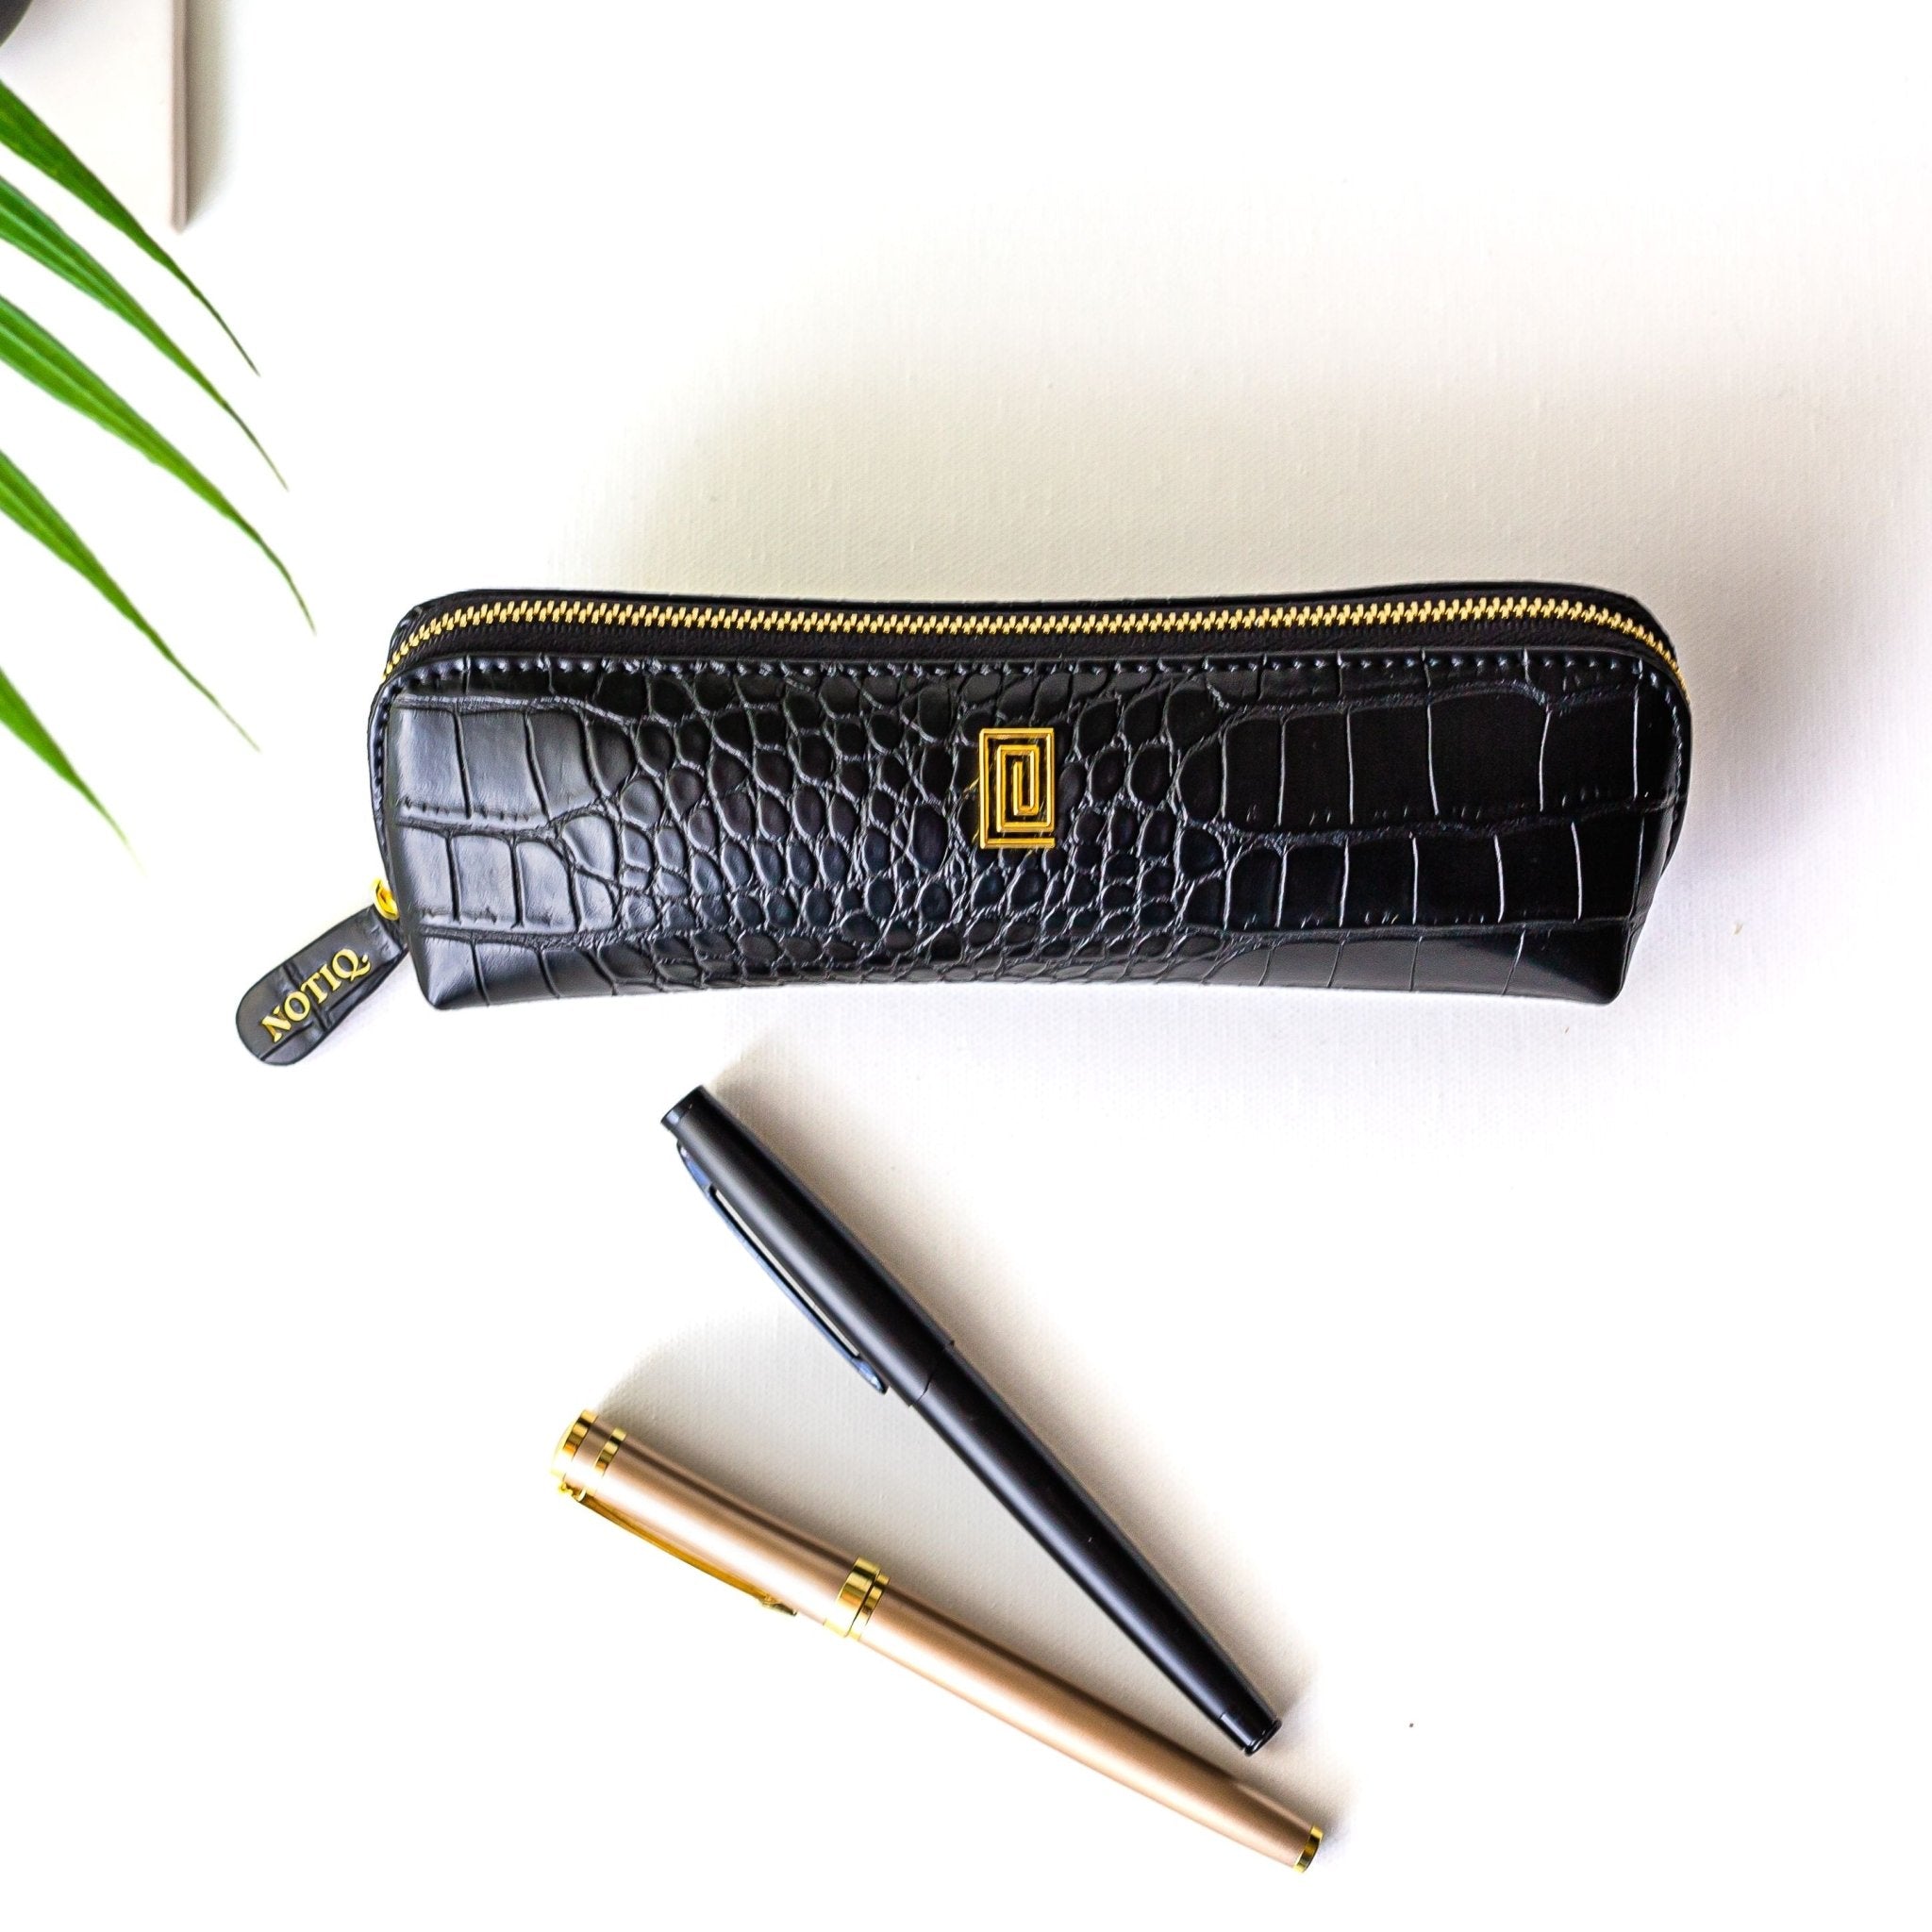 Gold on Black Croco Extended - Fits Tombow Pens | Pencil Case | Pen Case | NOTIQ